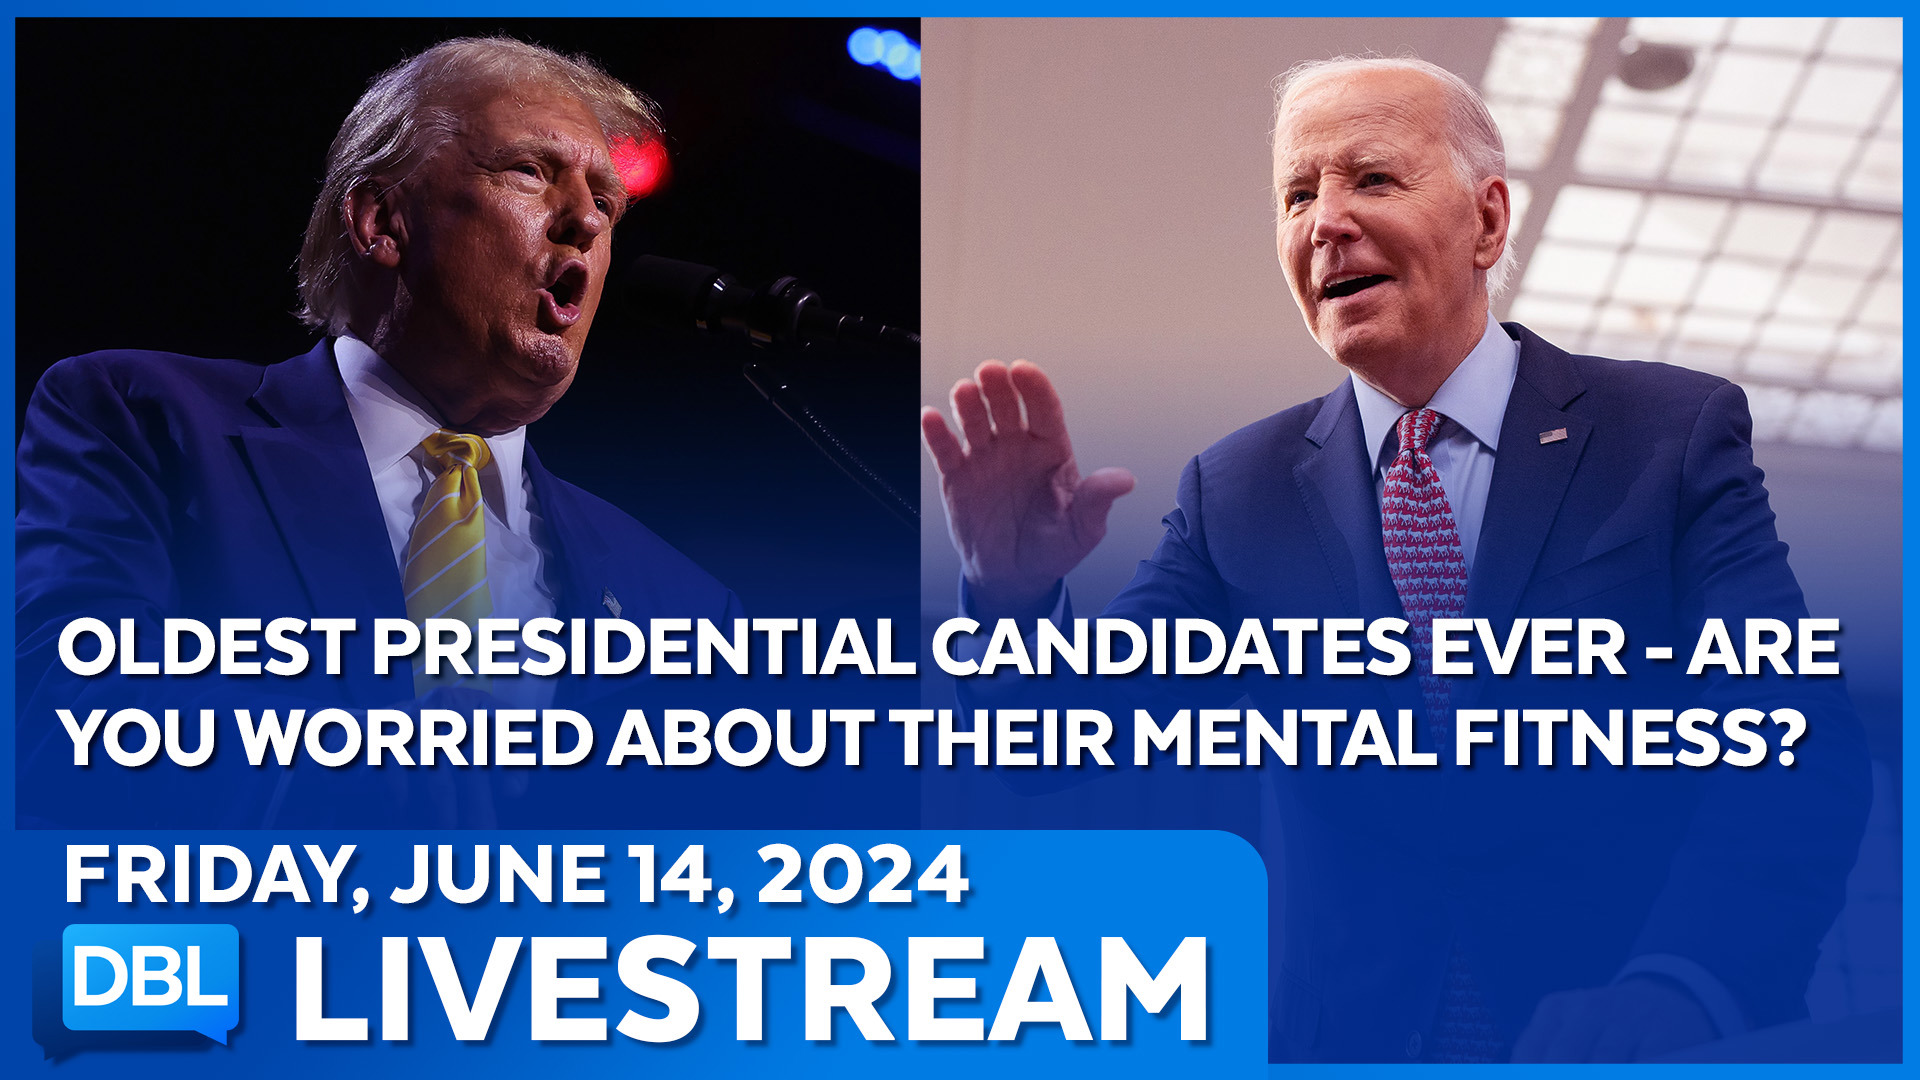 Are You Worried About Trump's and Biden's Mental Fitness?